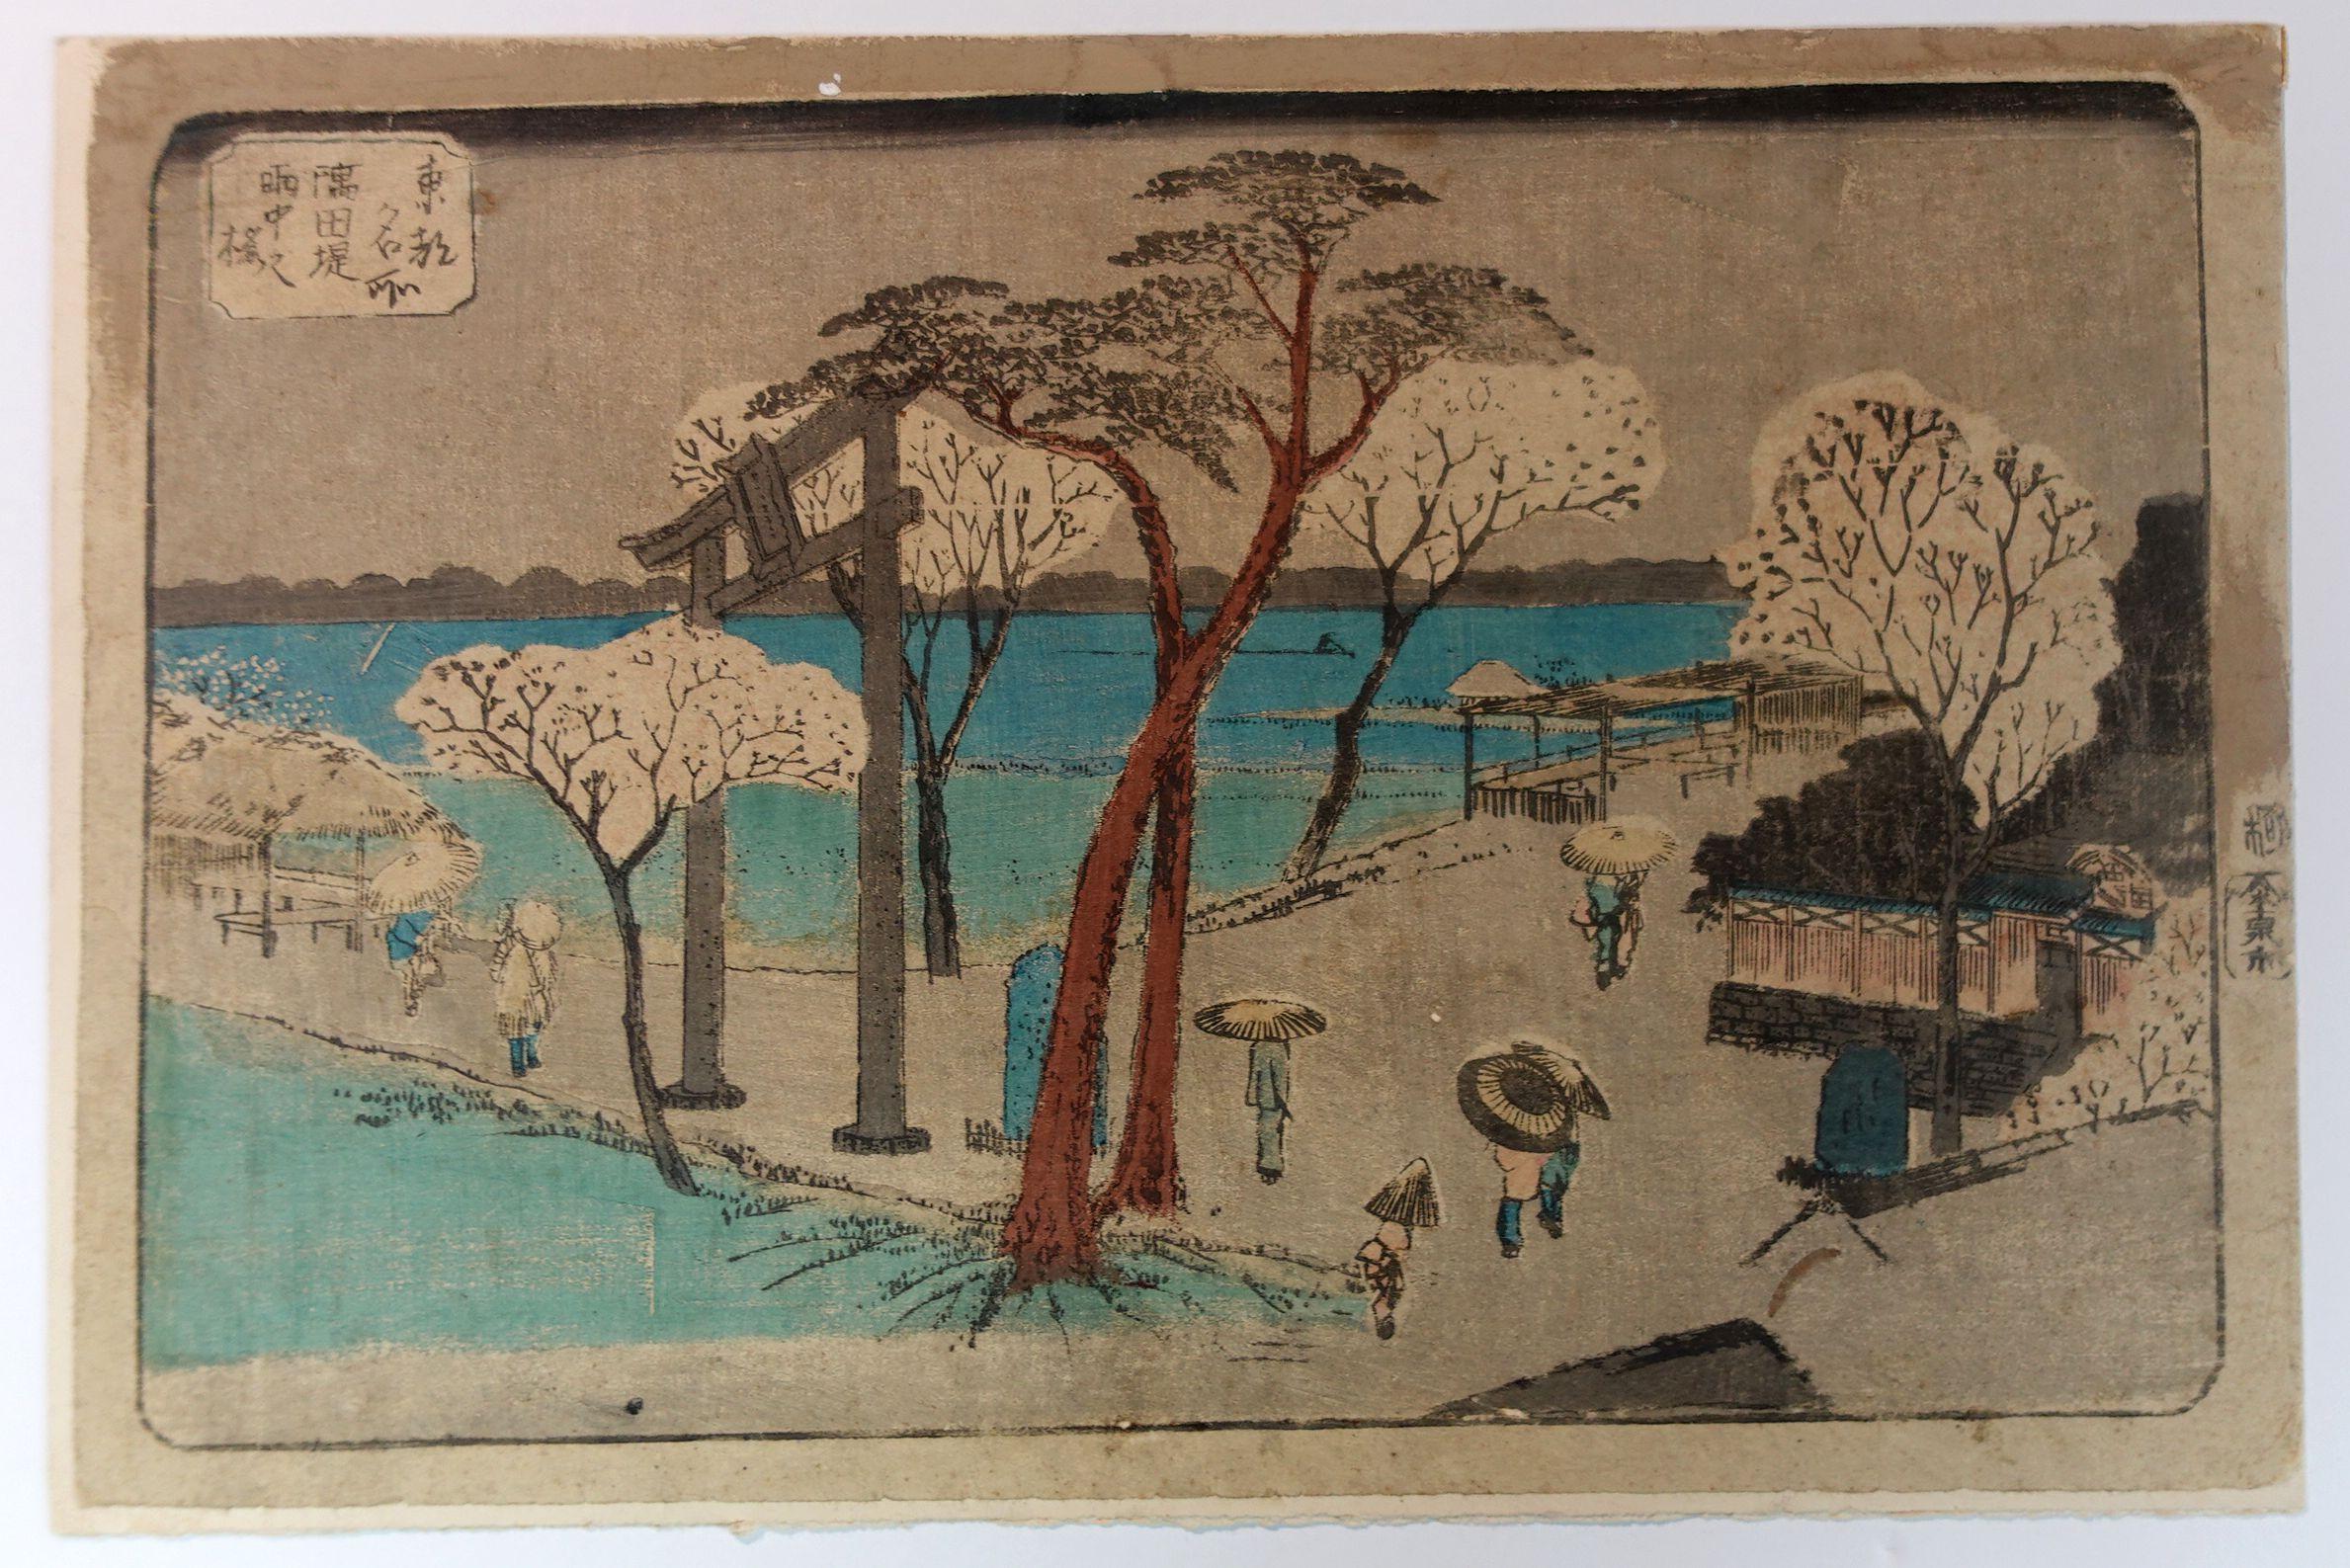 Utagawa Yoshitora, ????? (1836~1880) was a designer of ukiyo-e Japanese woodblock prints and an illustrator of books and newspapers who was active from about 1850 to about 1880. He was born in Edo, but neither his date of birth nor date of death is